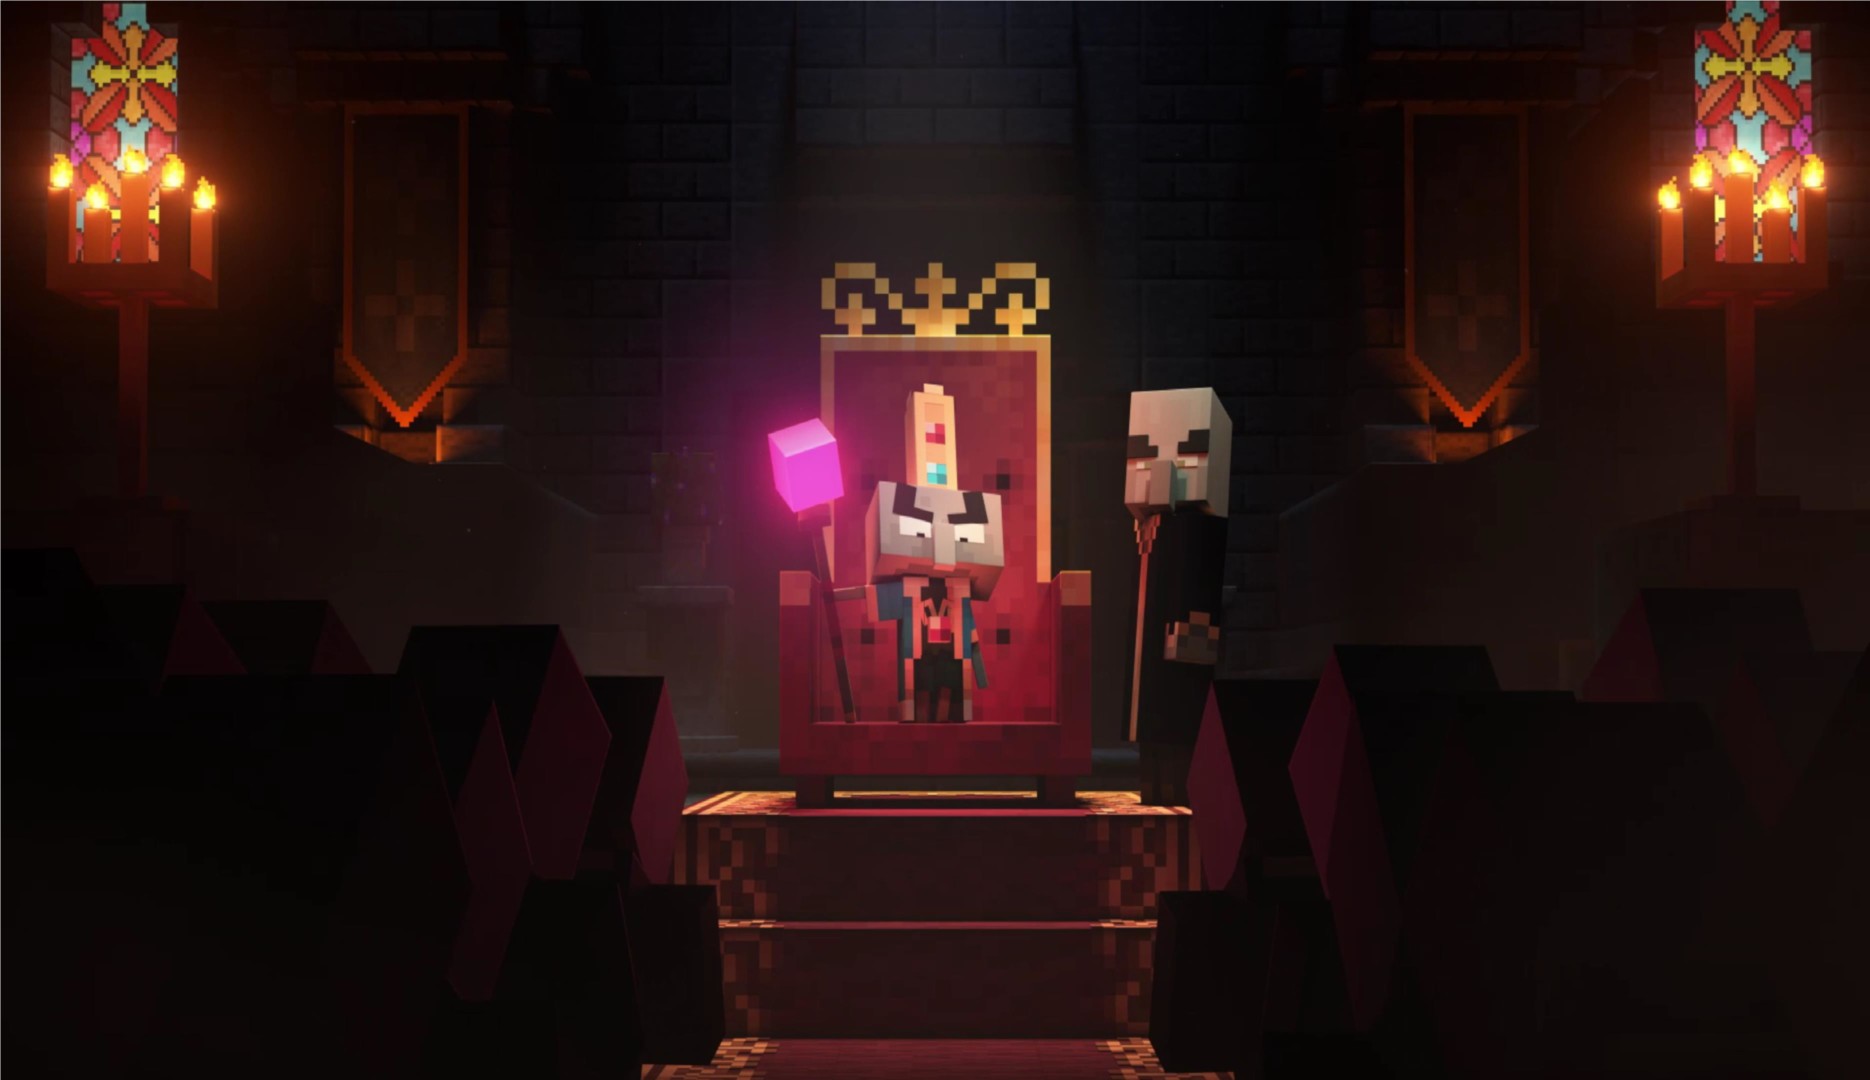 Minecraft Dungeon Fan Art Looks Fantastic And May Change How You See The Arch-Illager